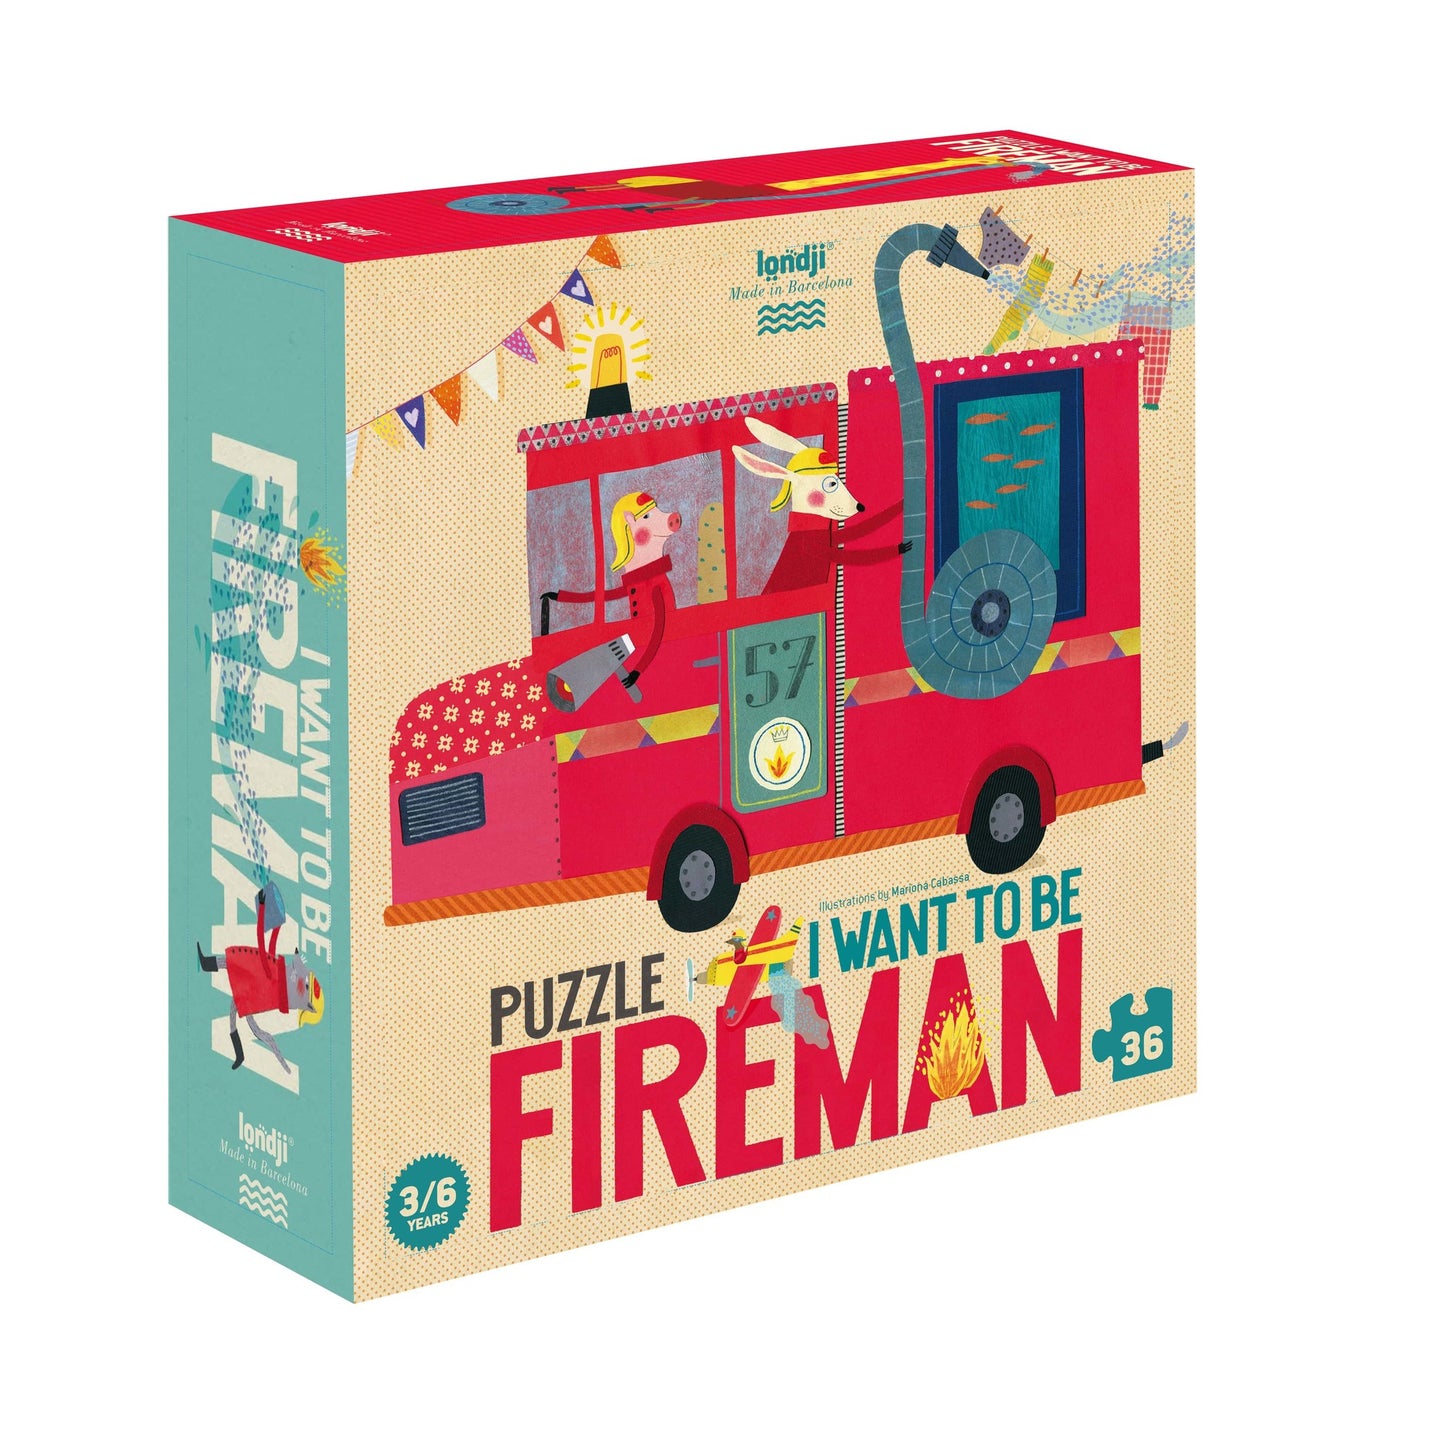 I want to be a firefighter puzzle